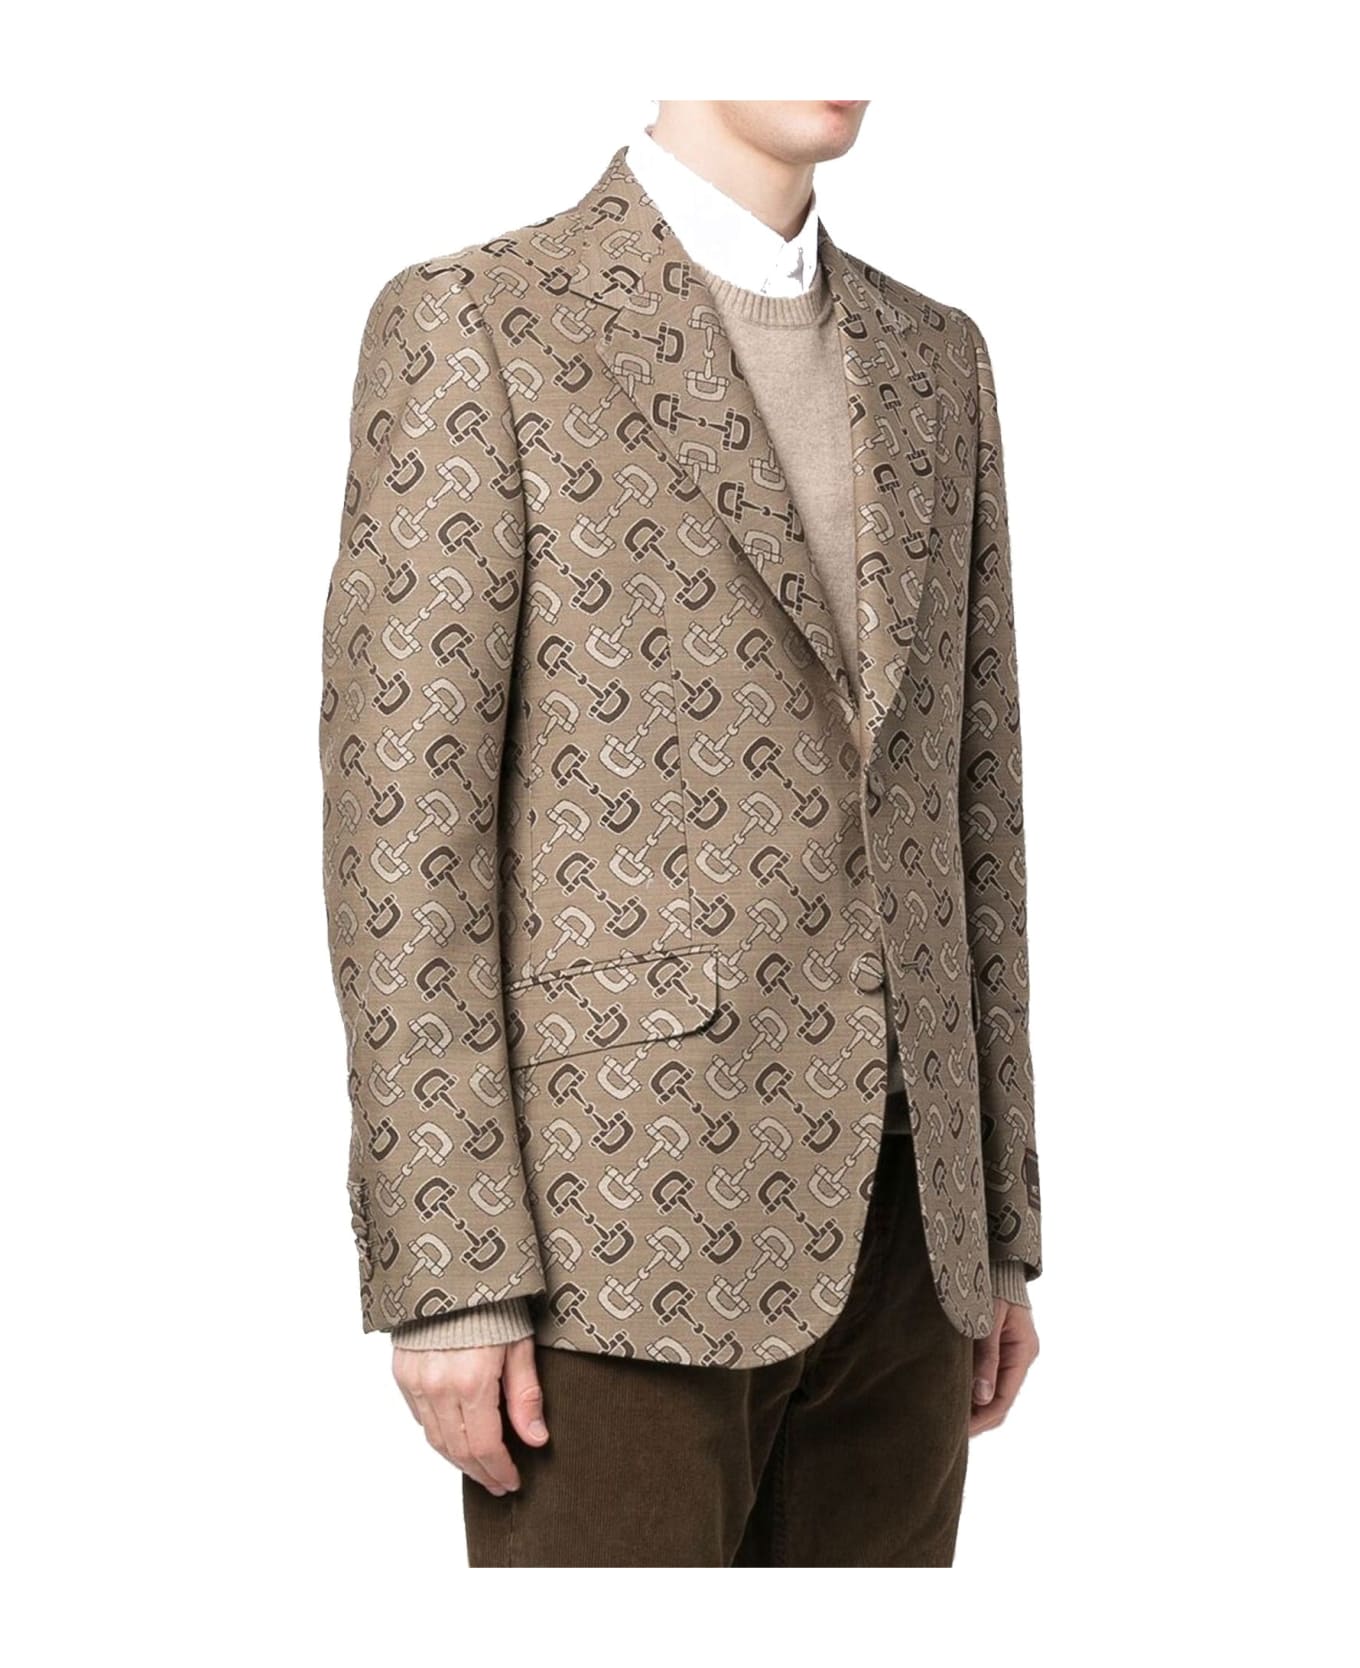 Gucci Cotton And Wool Jacket - Beige